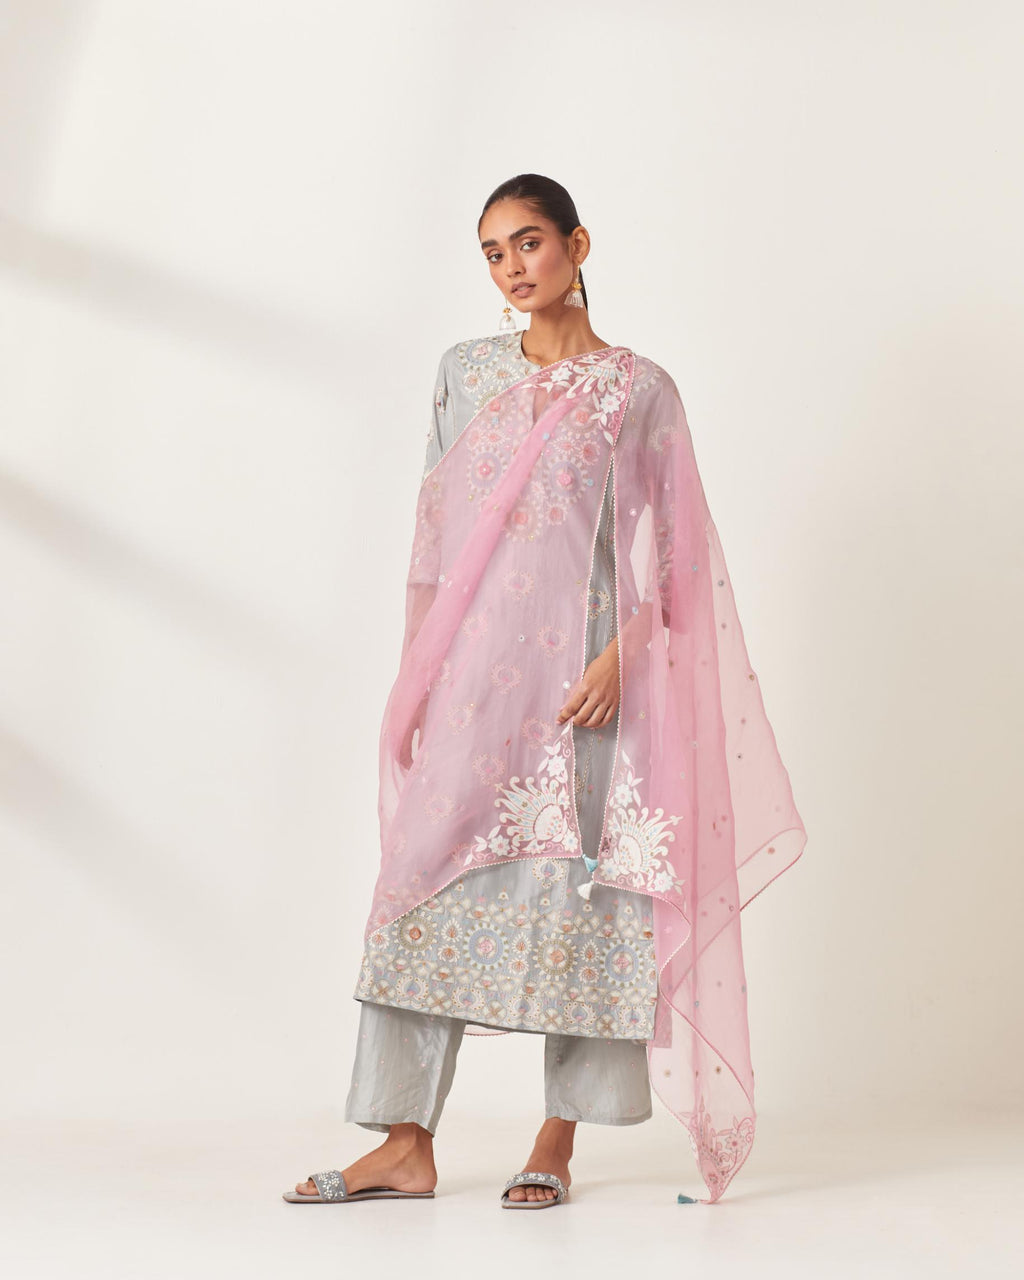 Pink silk organza dupatta with appliqué work and multi colored flower embroidery all-over the dupatta.